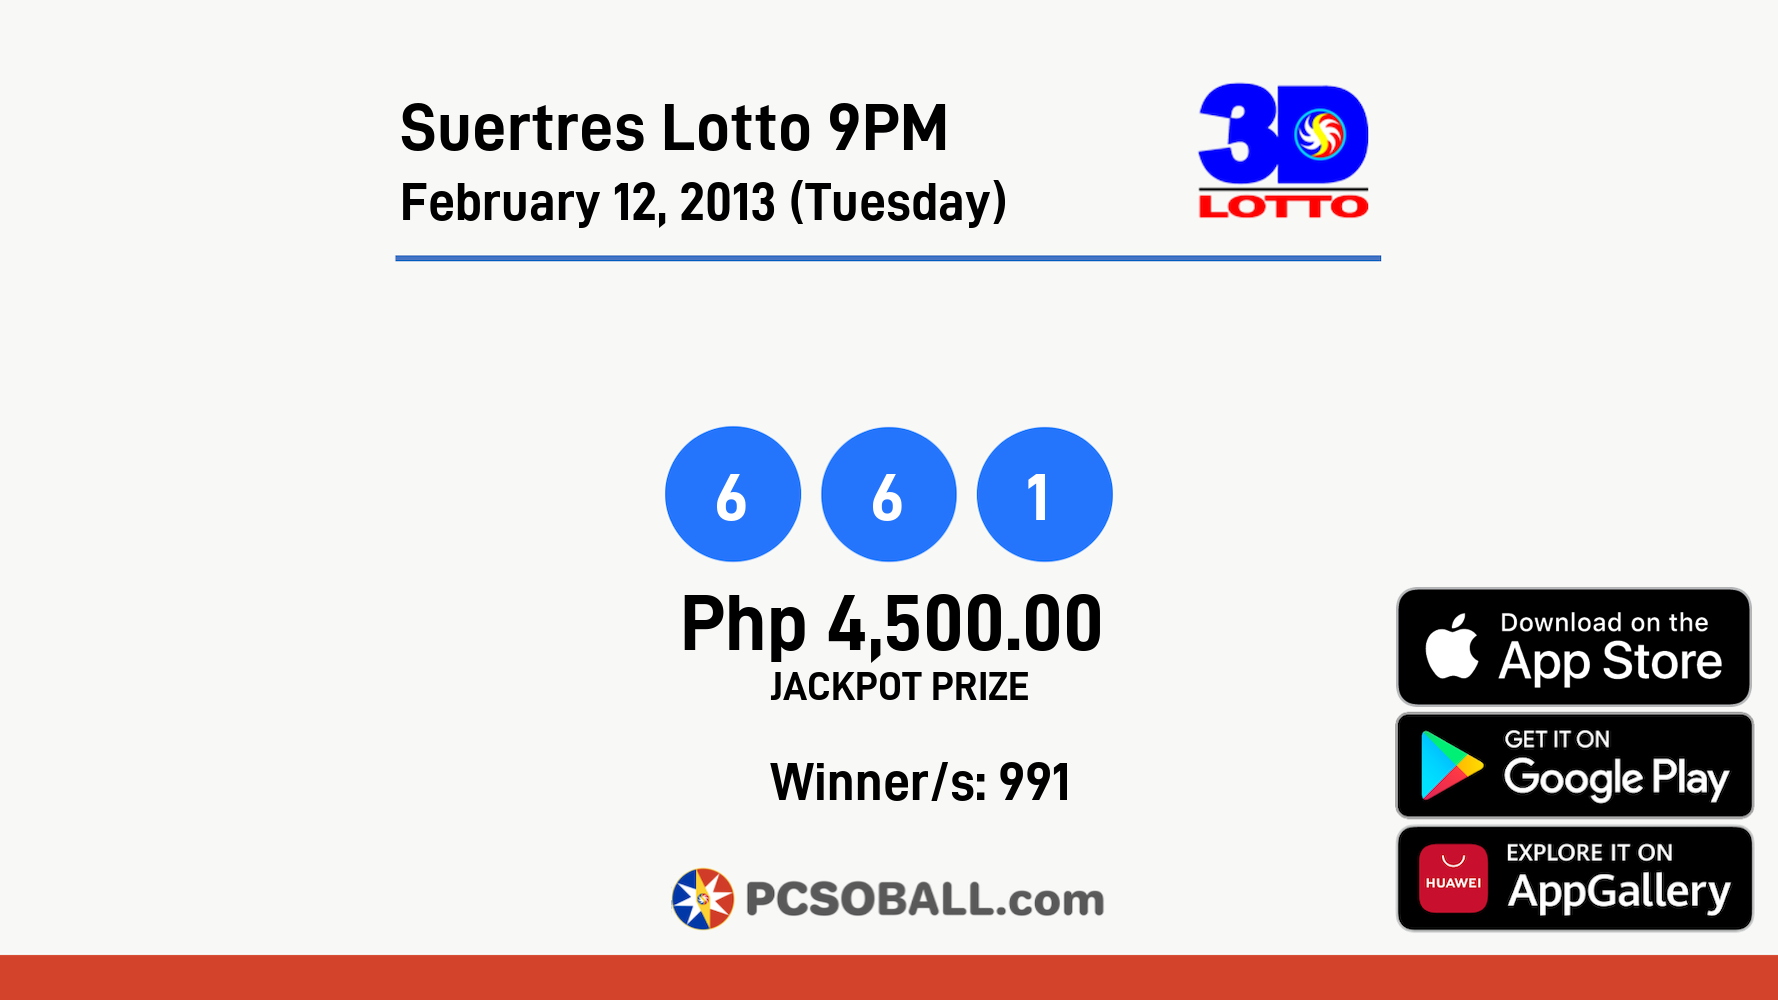 Suertres Lotto 9PM February 12, 2013 (Tuesday) Result